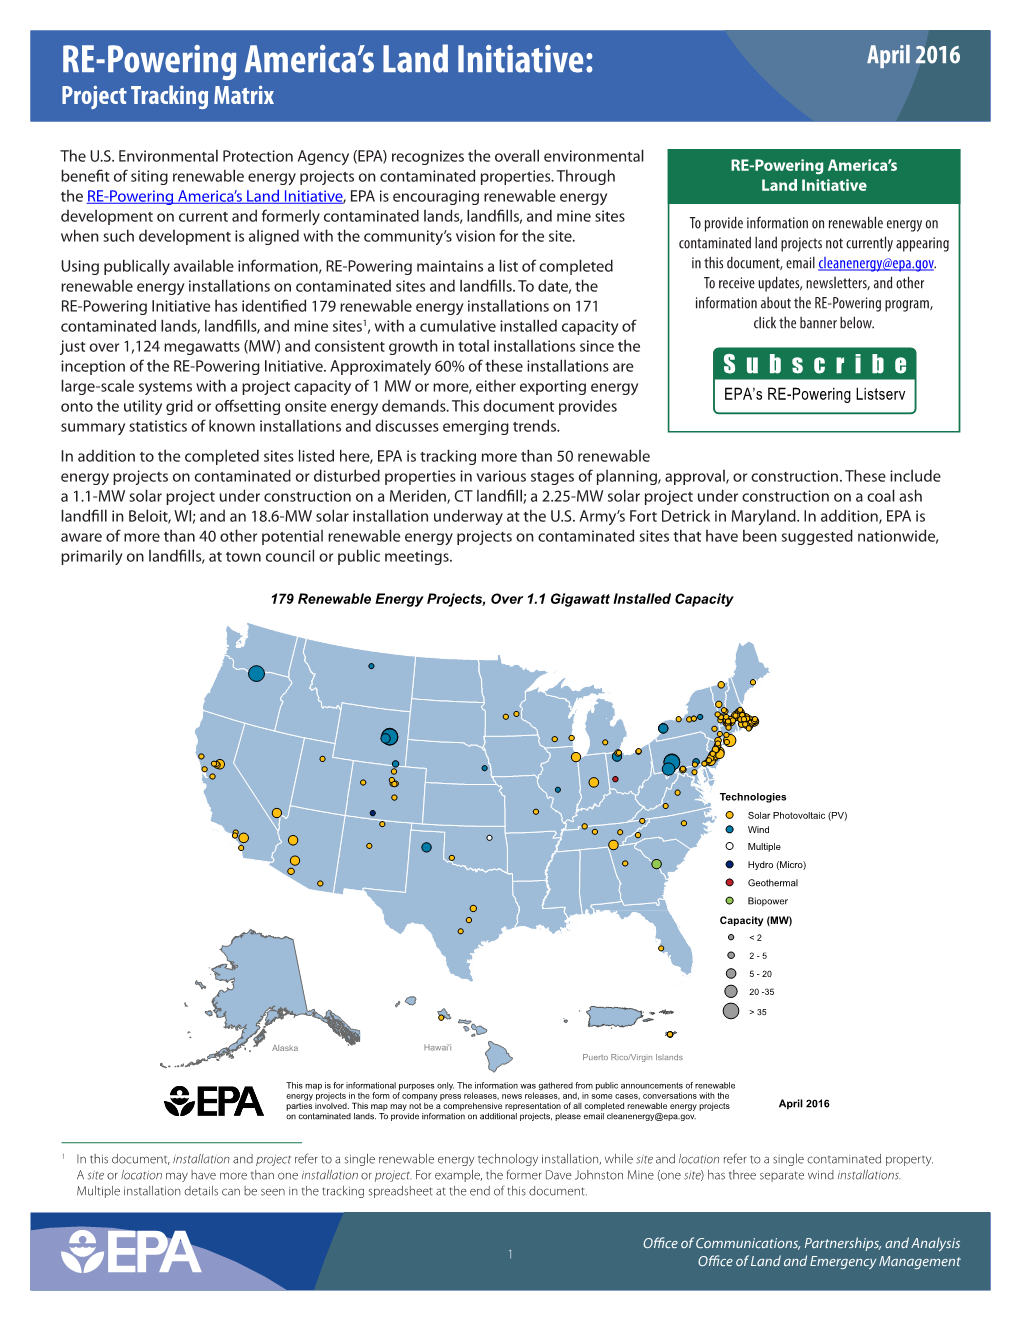 RE-Powering America's Land Initiative: Project Tracking Matrix April 2016